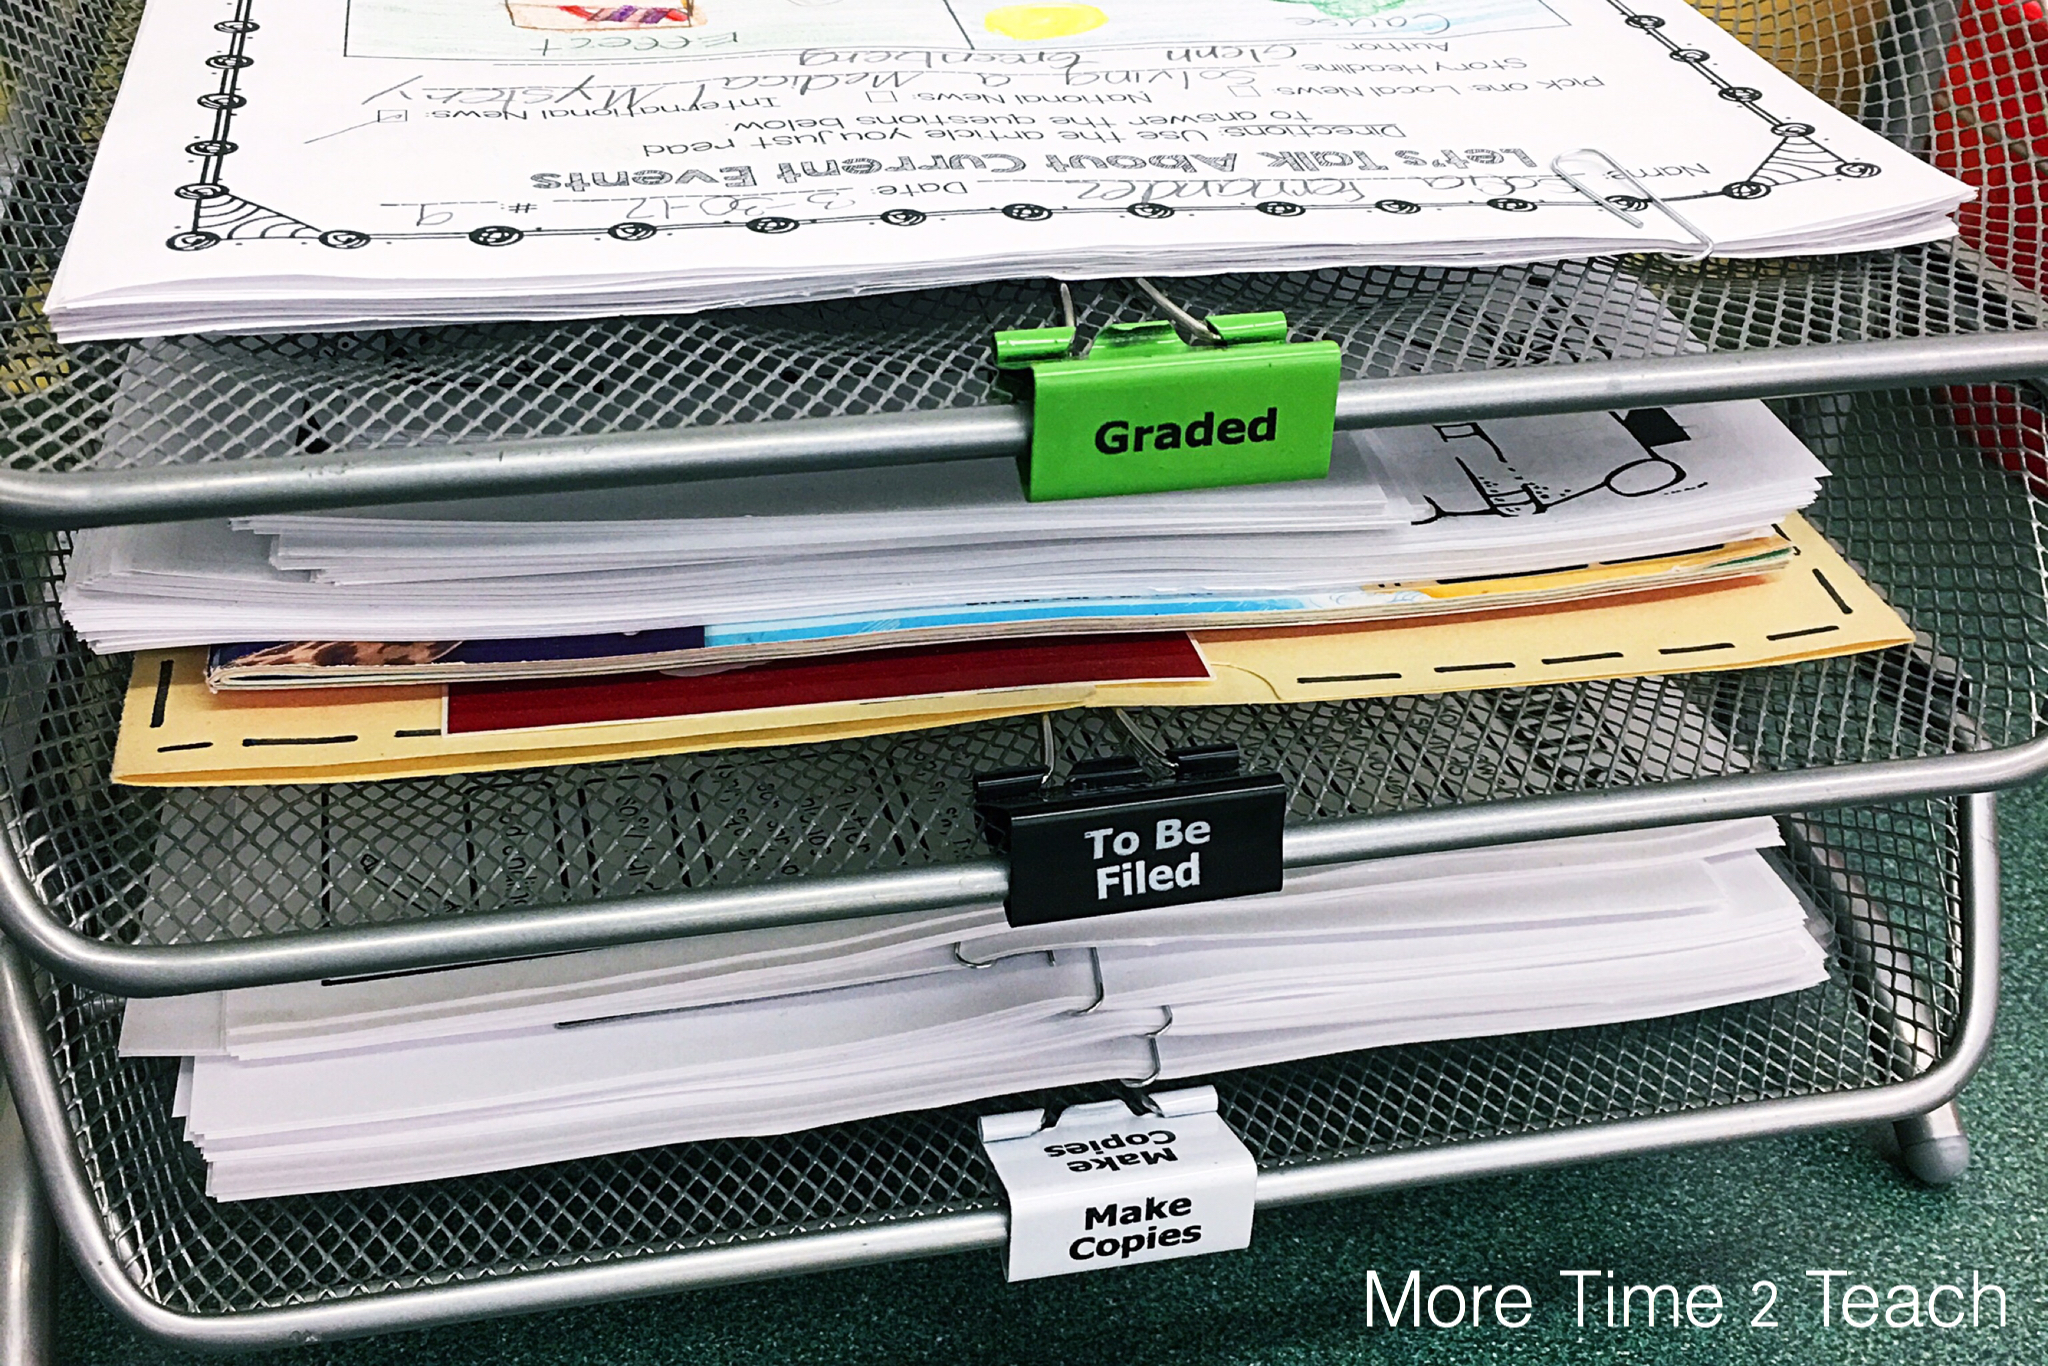 With so little hours in the day, hundreds of papers to grade, a weeks worth of lessons to plan for, and data to review, learning how to manage your time is crucial for TEACHERS. This post targets 6 things TEACHERS can do right now to start managing their time better! Click to learn more about these tips on MoreTime2Teach.com